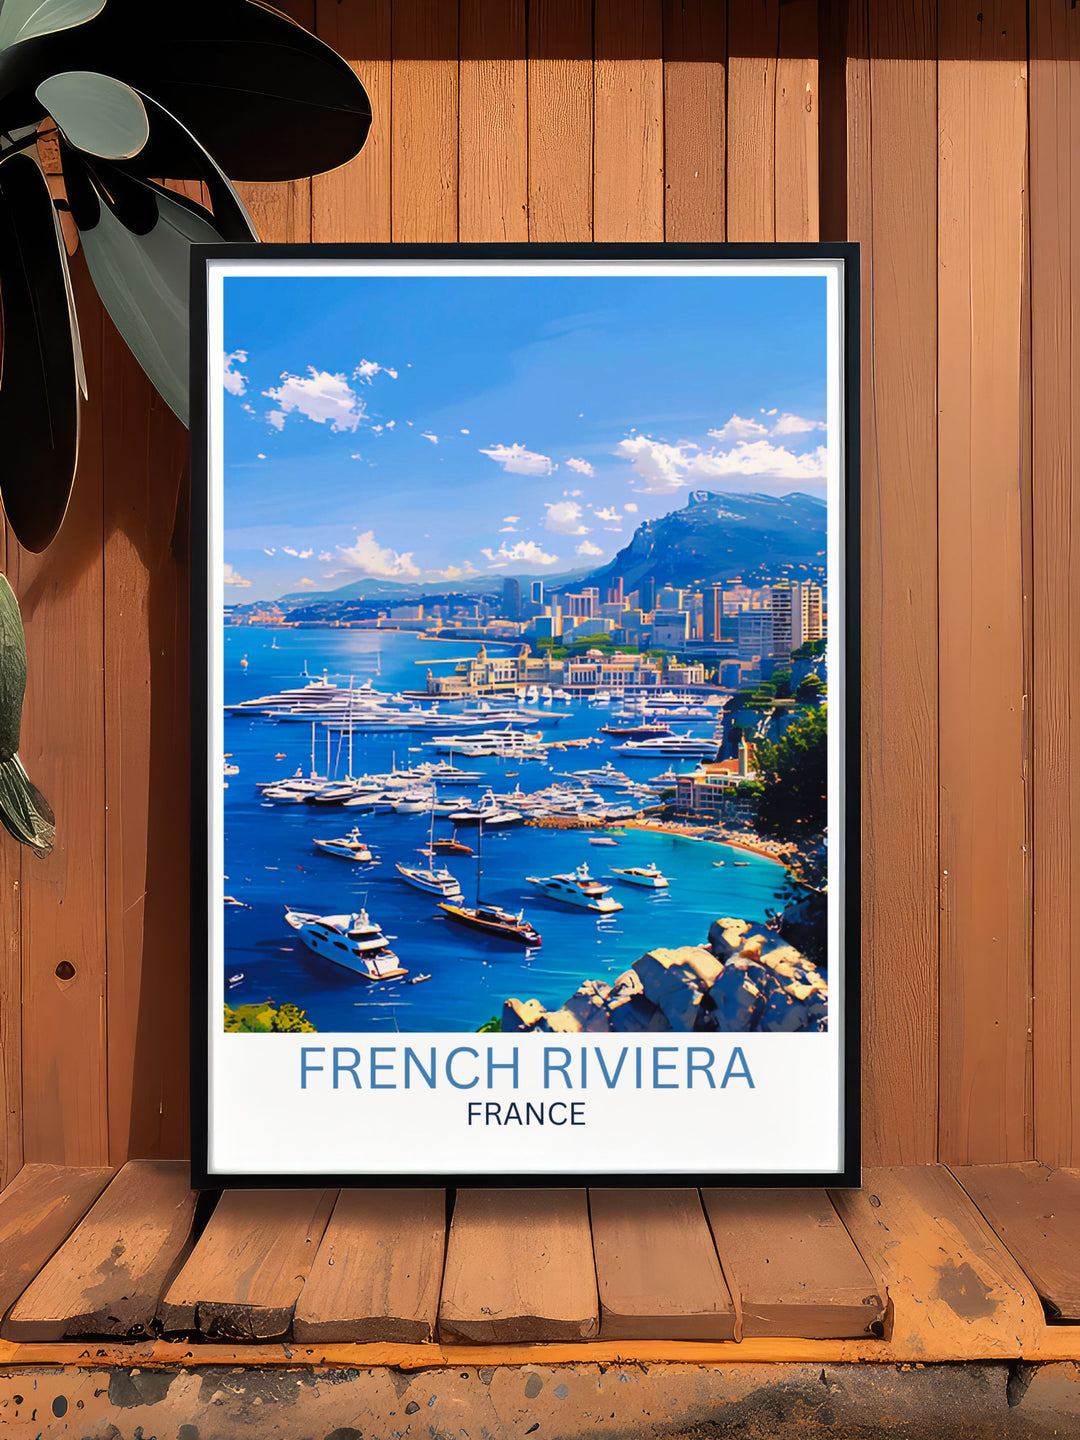 Panoramic shot of the French Rivieras coastline featuring sandy beaches and clear blue skies perfect for a serene wall hanging